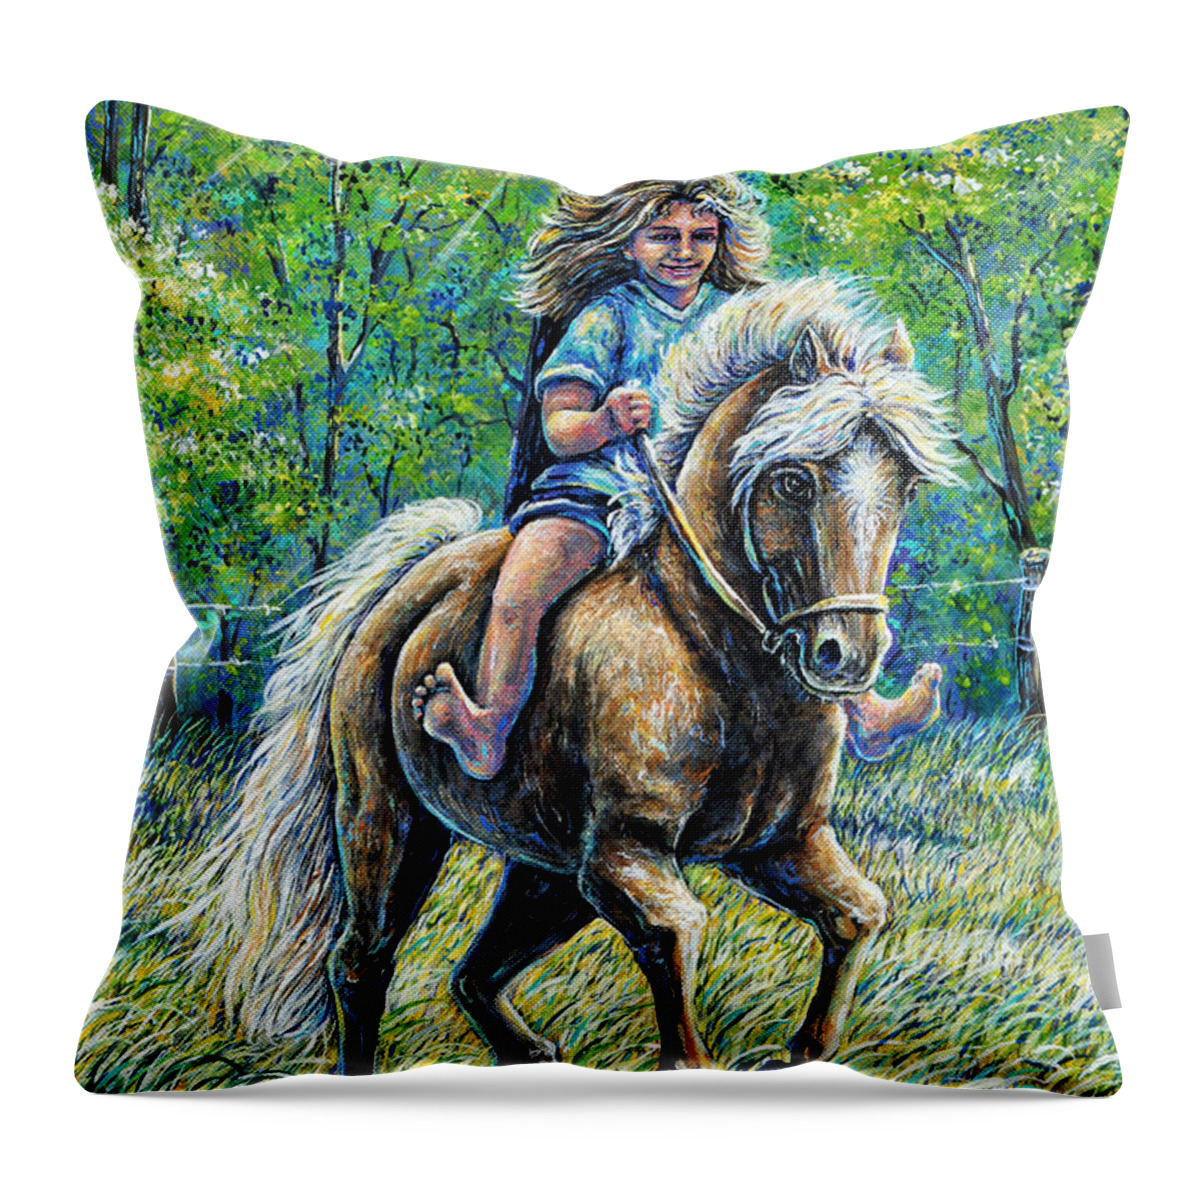 Girl Throw Pillow featuring the painting Barefoot Rider by Gail Butler